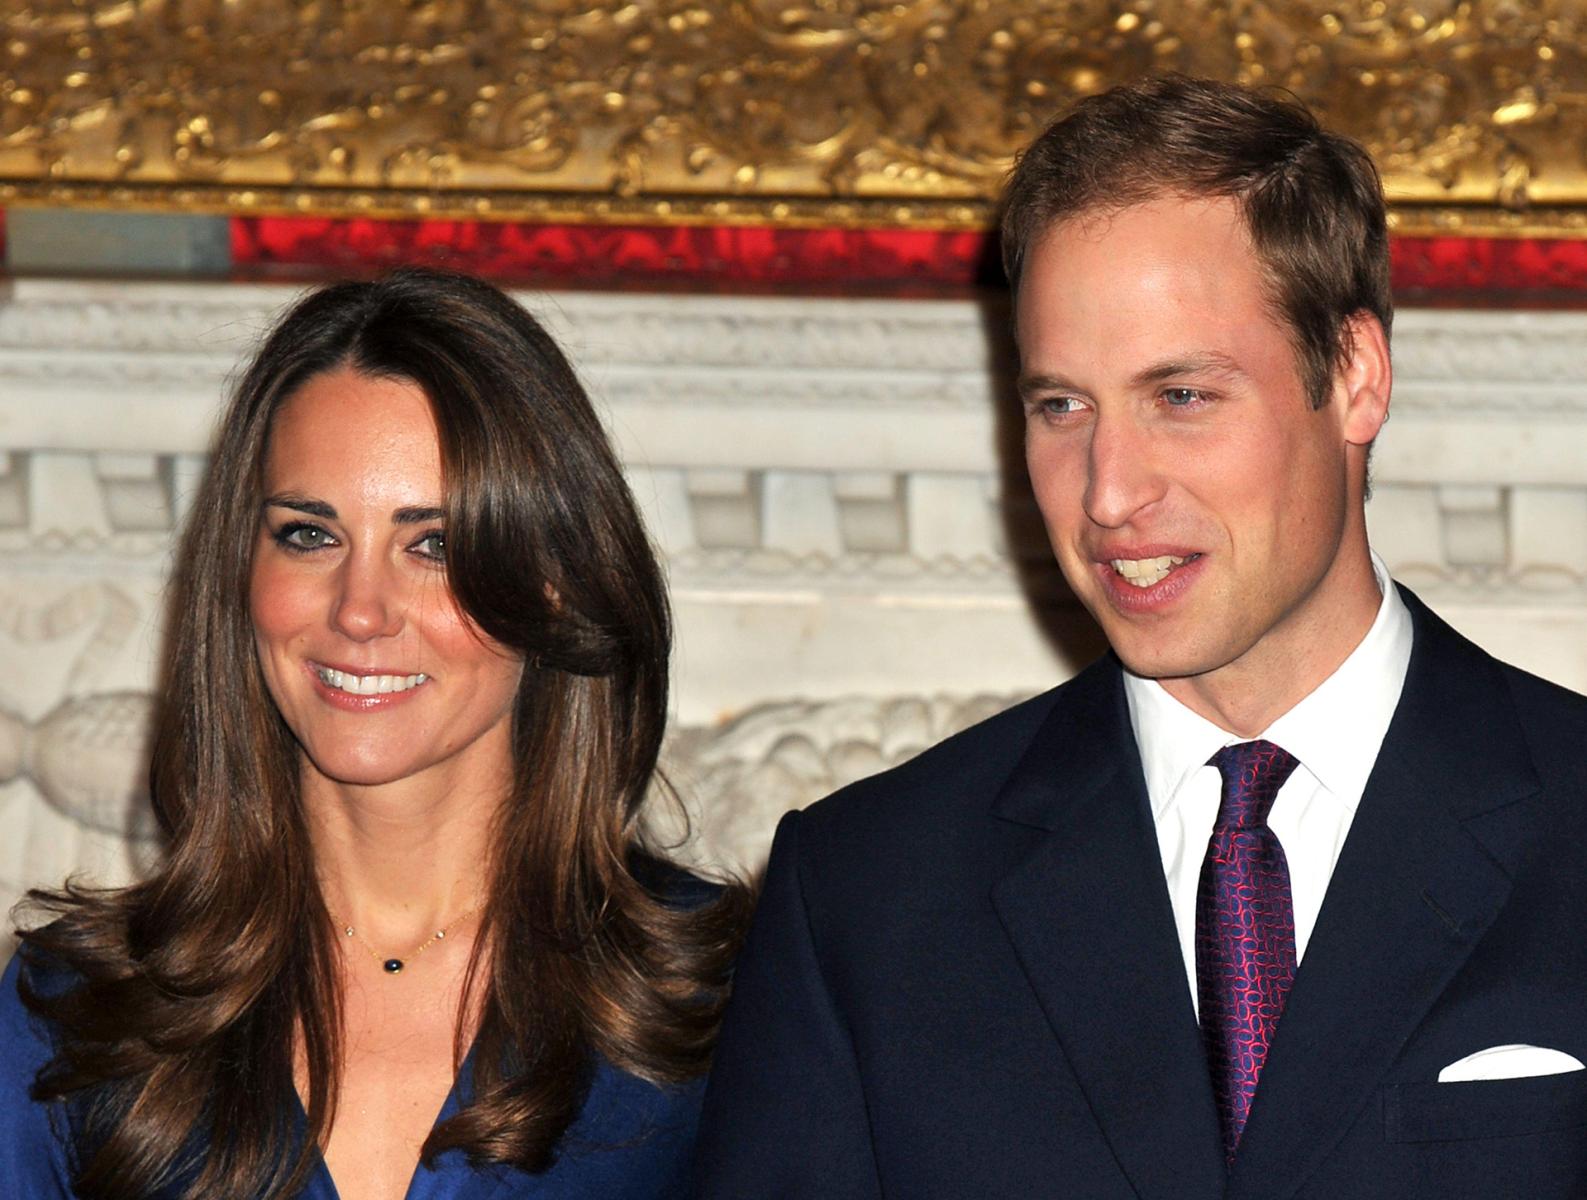 Prince William and Kate Middleton: a Royal Couple With a Rocky Past - image 4